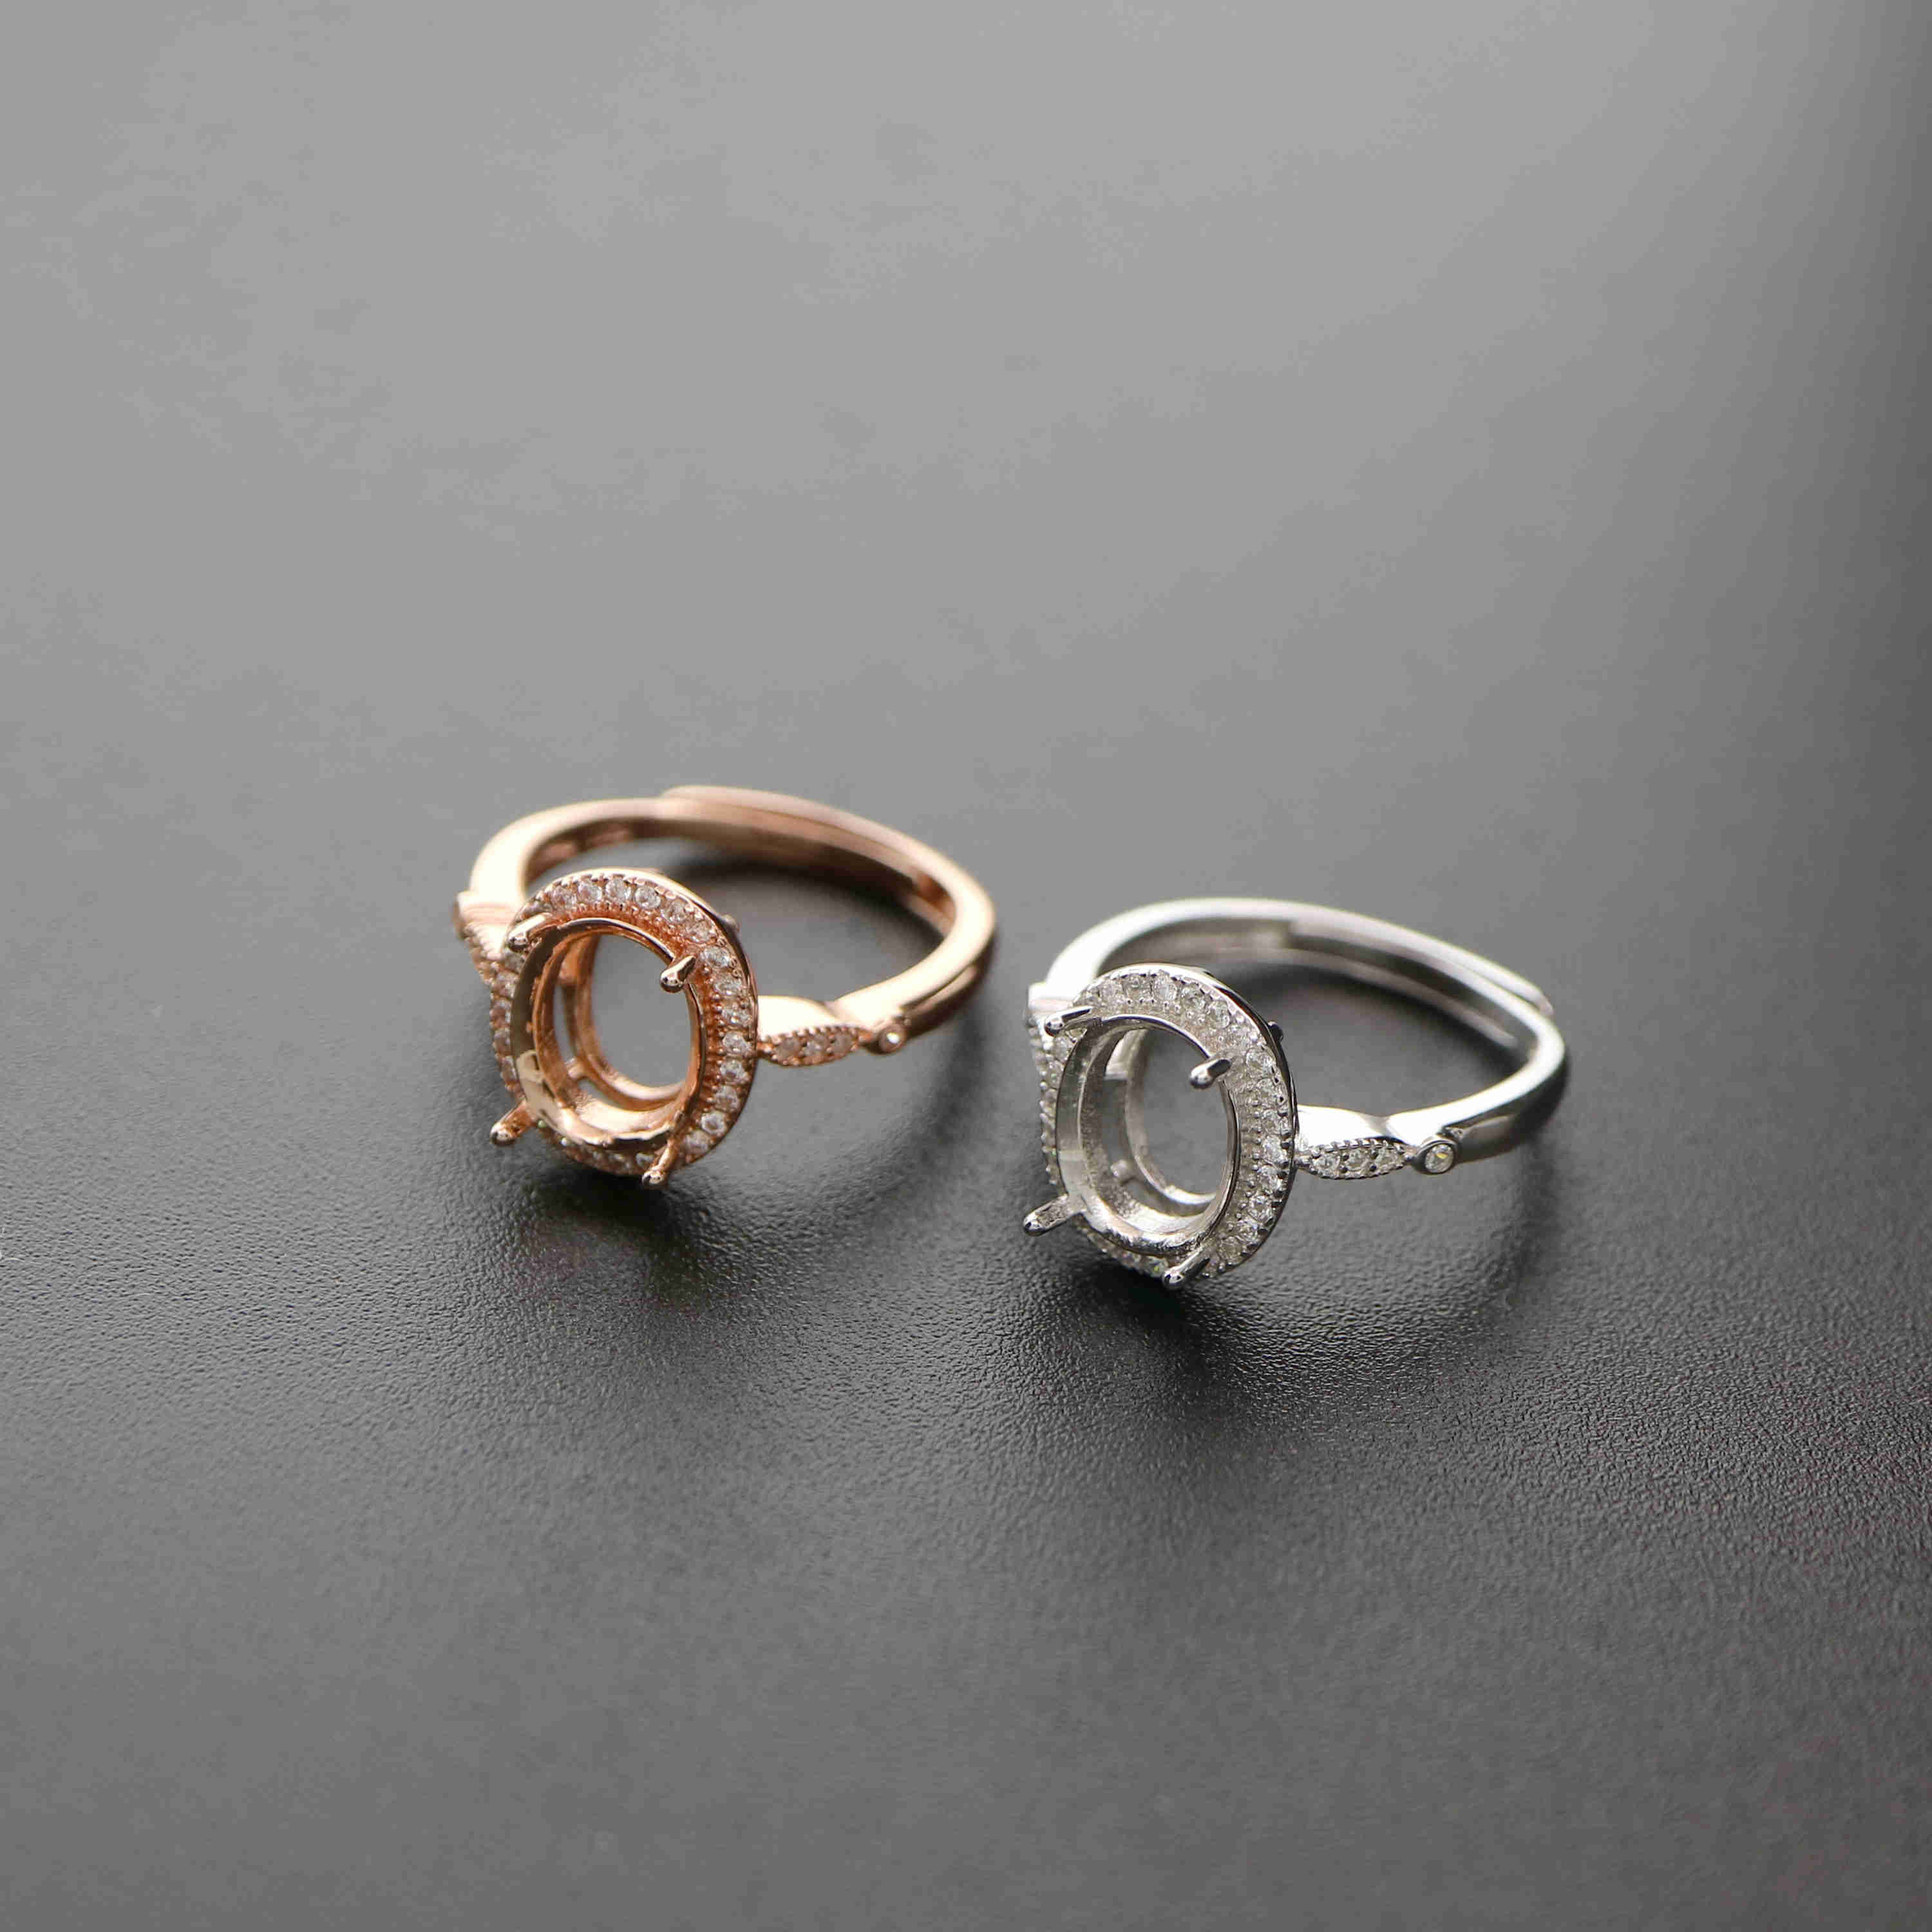 1Pcs Multiple Sizes Oval Rose Gold Silver Cabochon Prong Bezel Solid 925 Sterling Silver Adjustable Ring Settings 1224010 - Click Image to Close